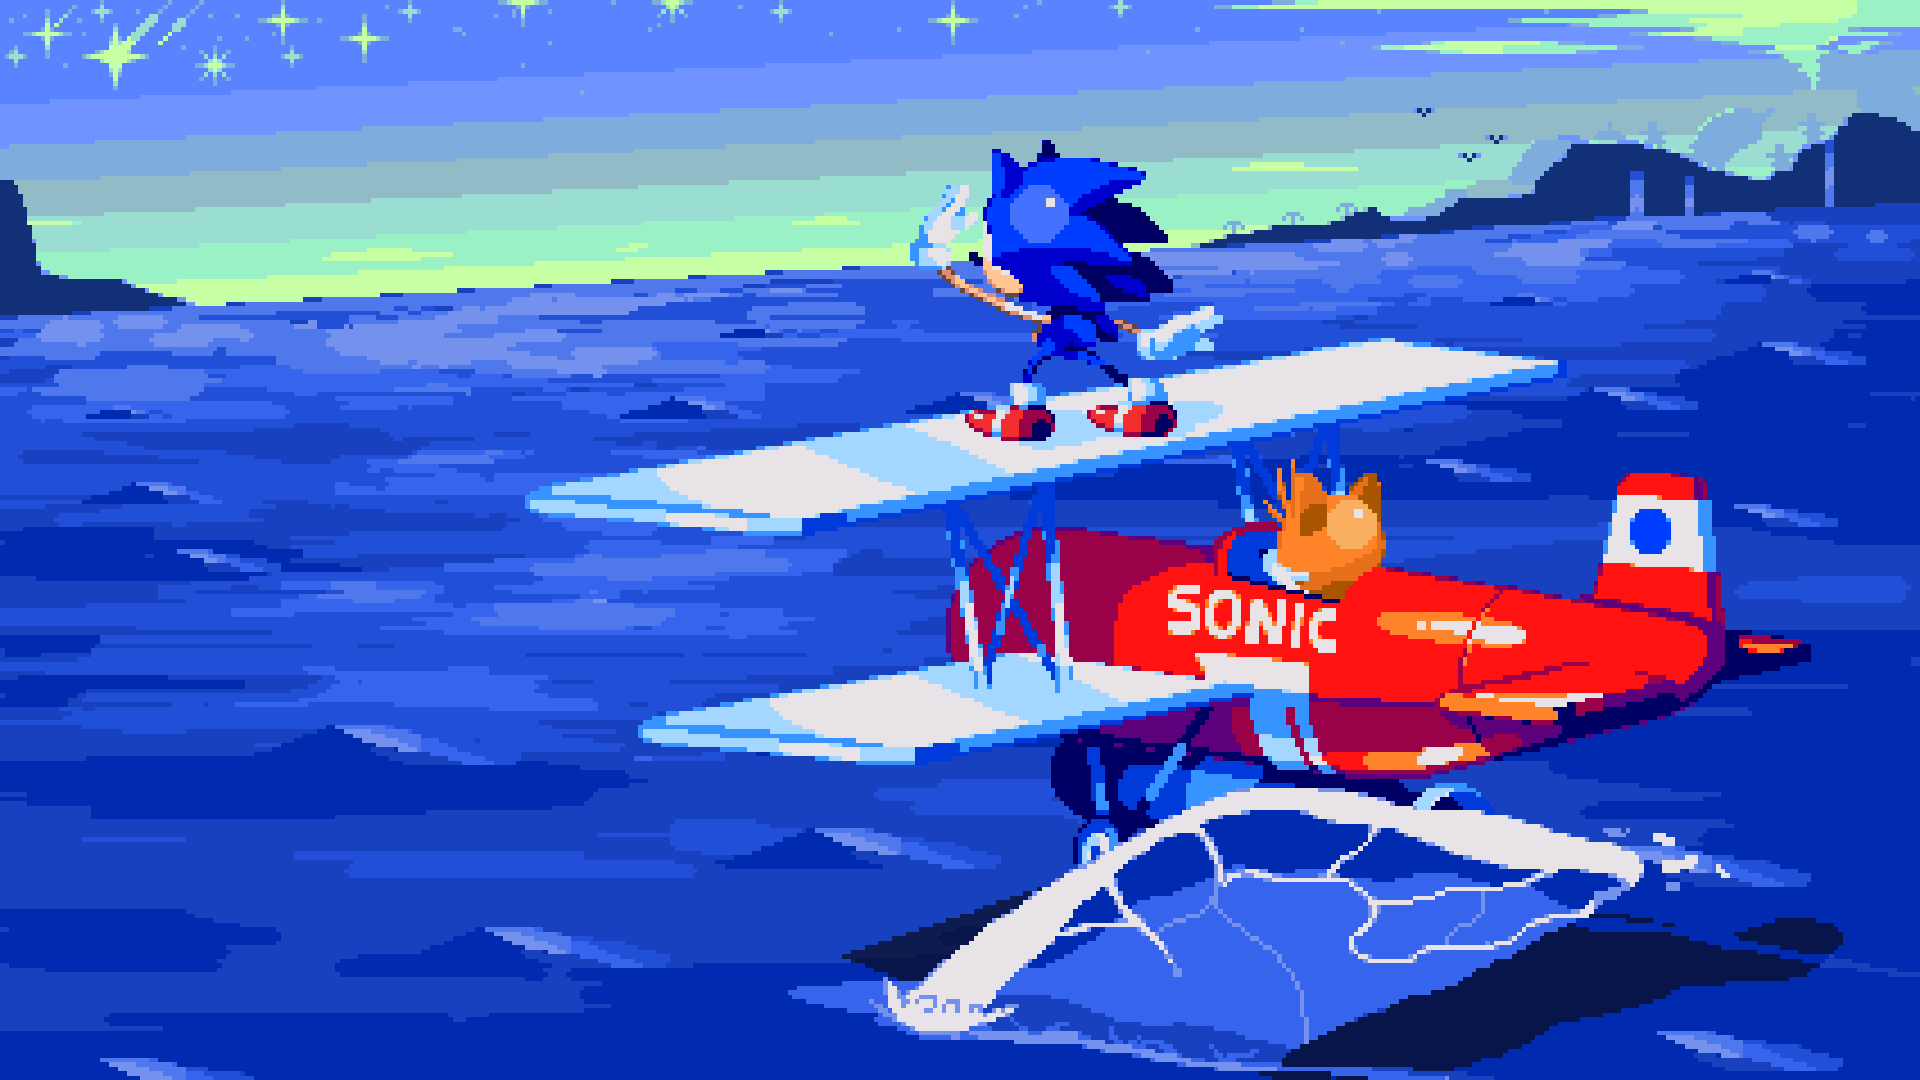 Fan Spotlight: Sonic and the Fallen Star is a new timeless classic ...